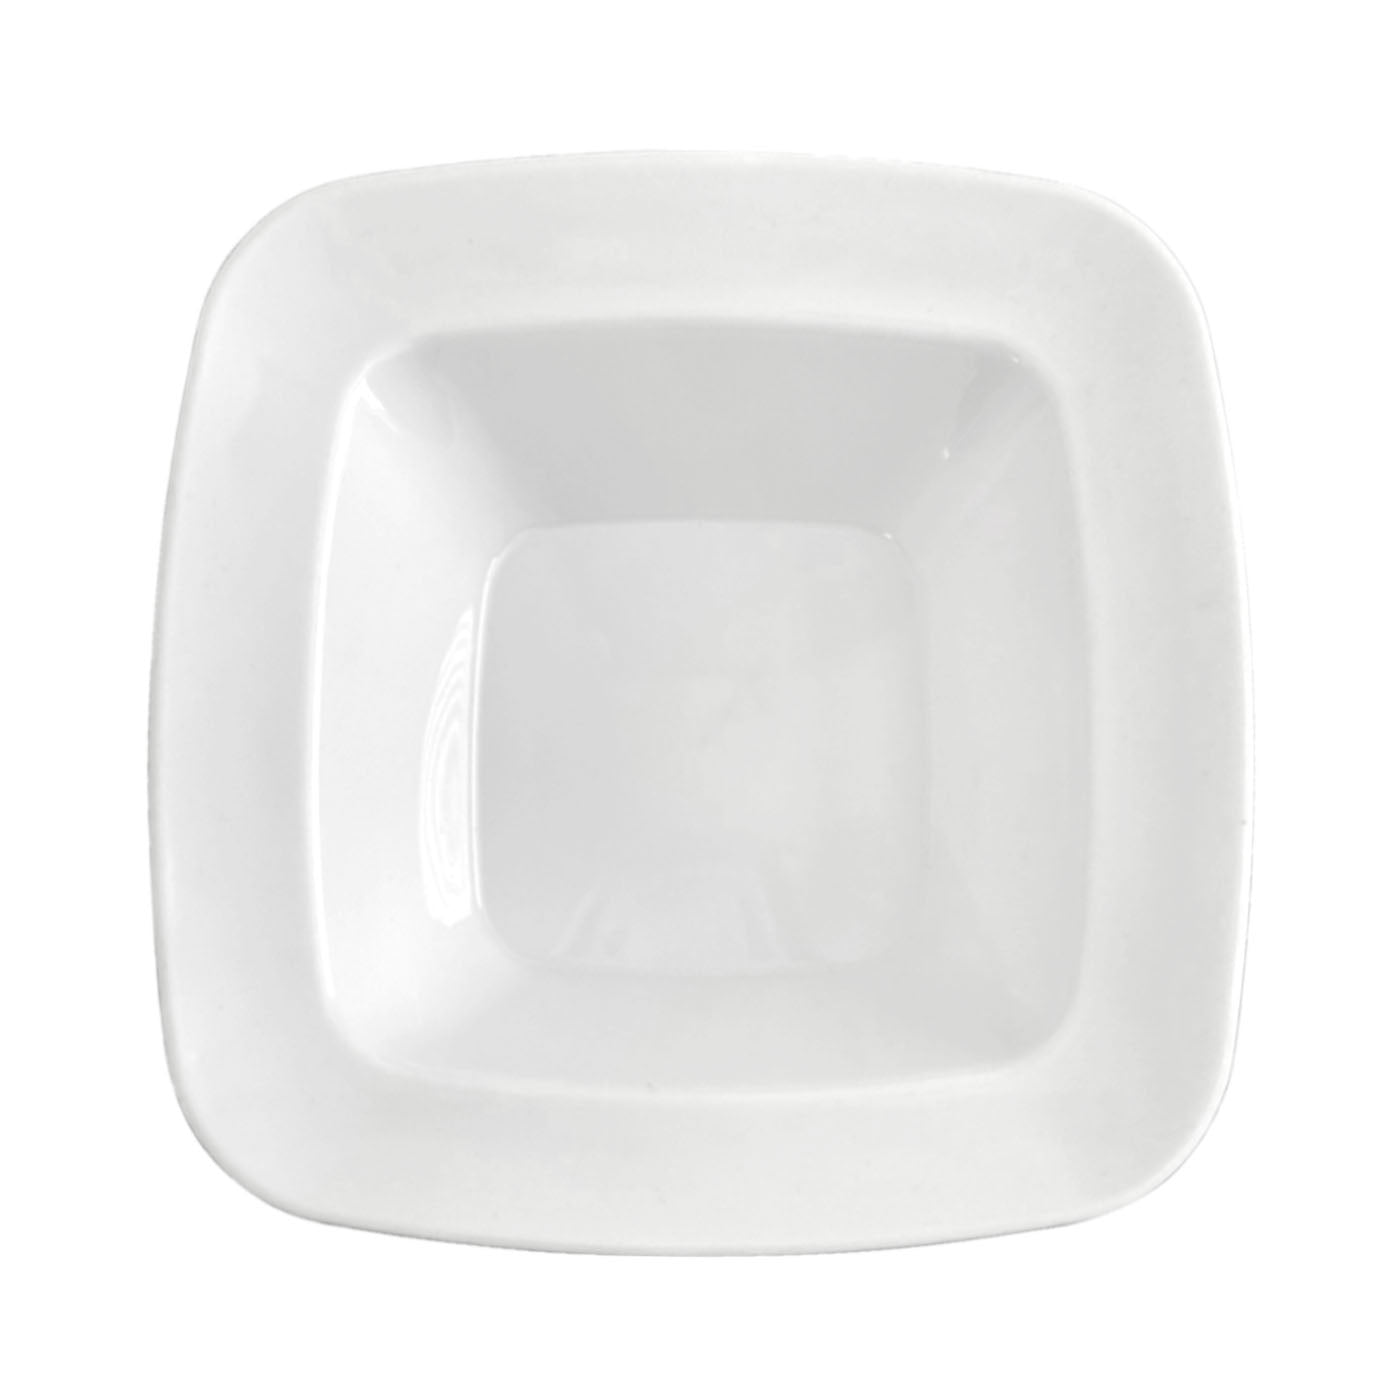 Solid White Rounded Square Disposable Plastic Dessert Bowls - 5 Ounce (120 Bowls)